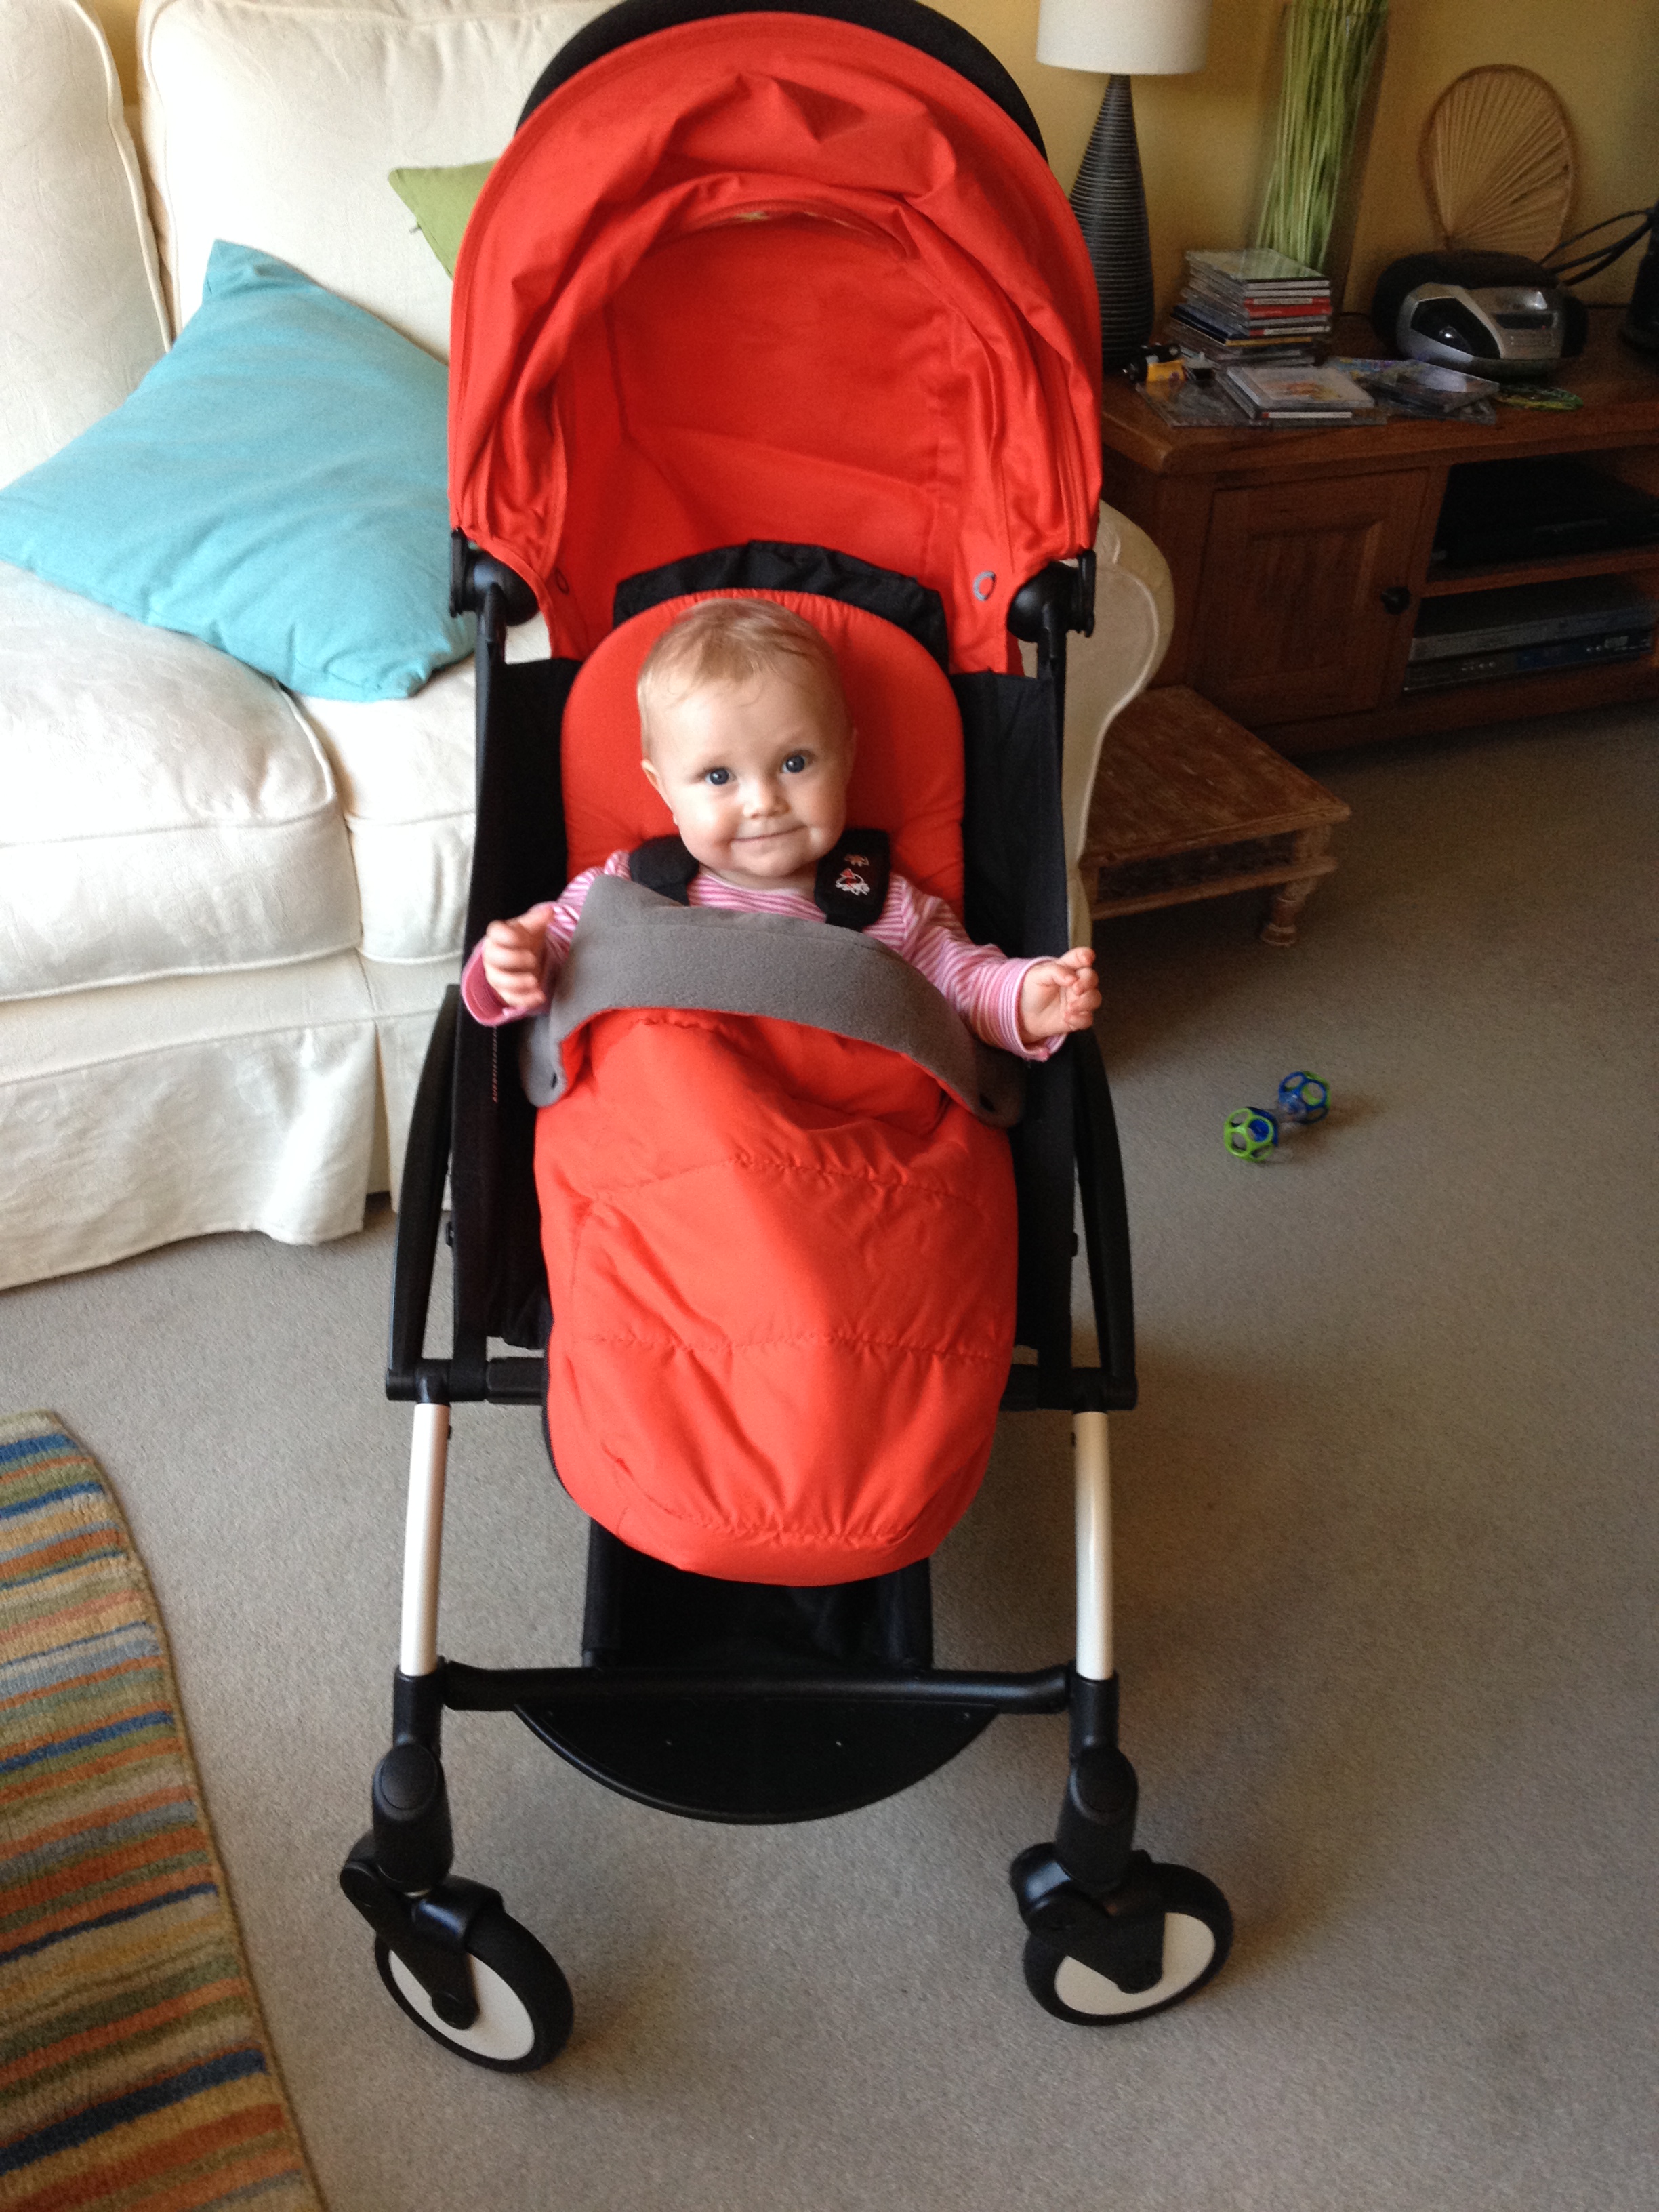 My eight-month-old daughter Emily was very pleased with her new mode of transport